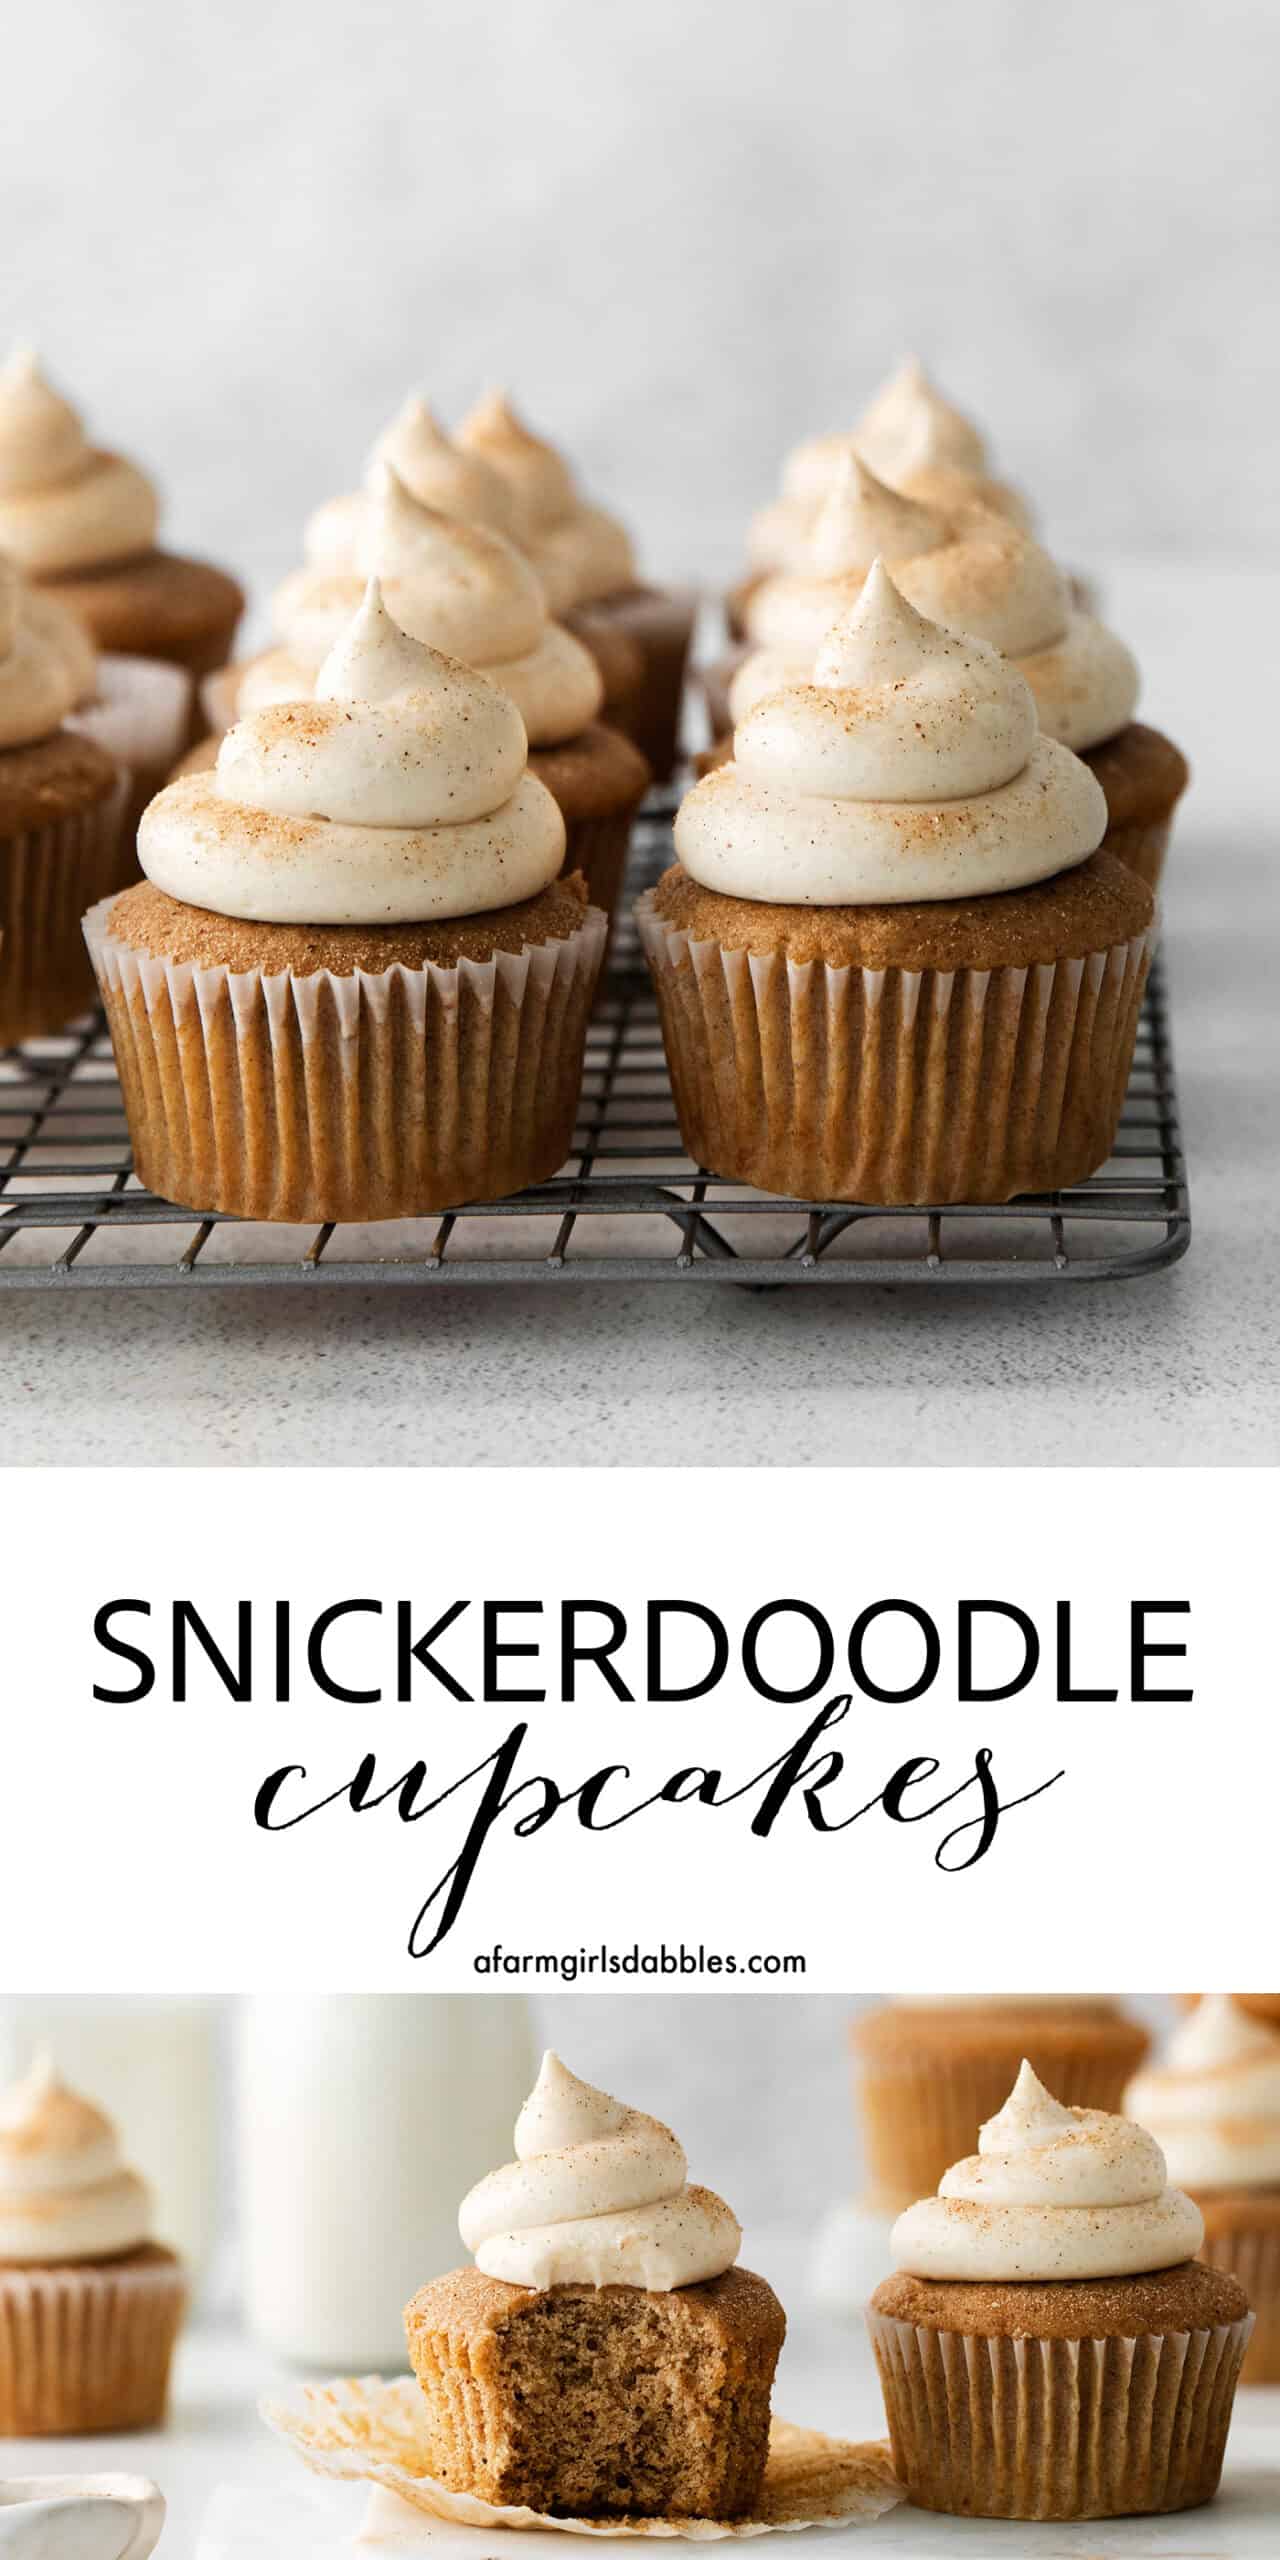 Pinterest image for snickerdoodle cupcakes